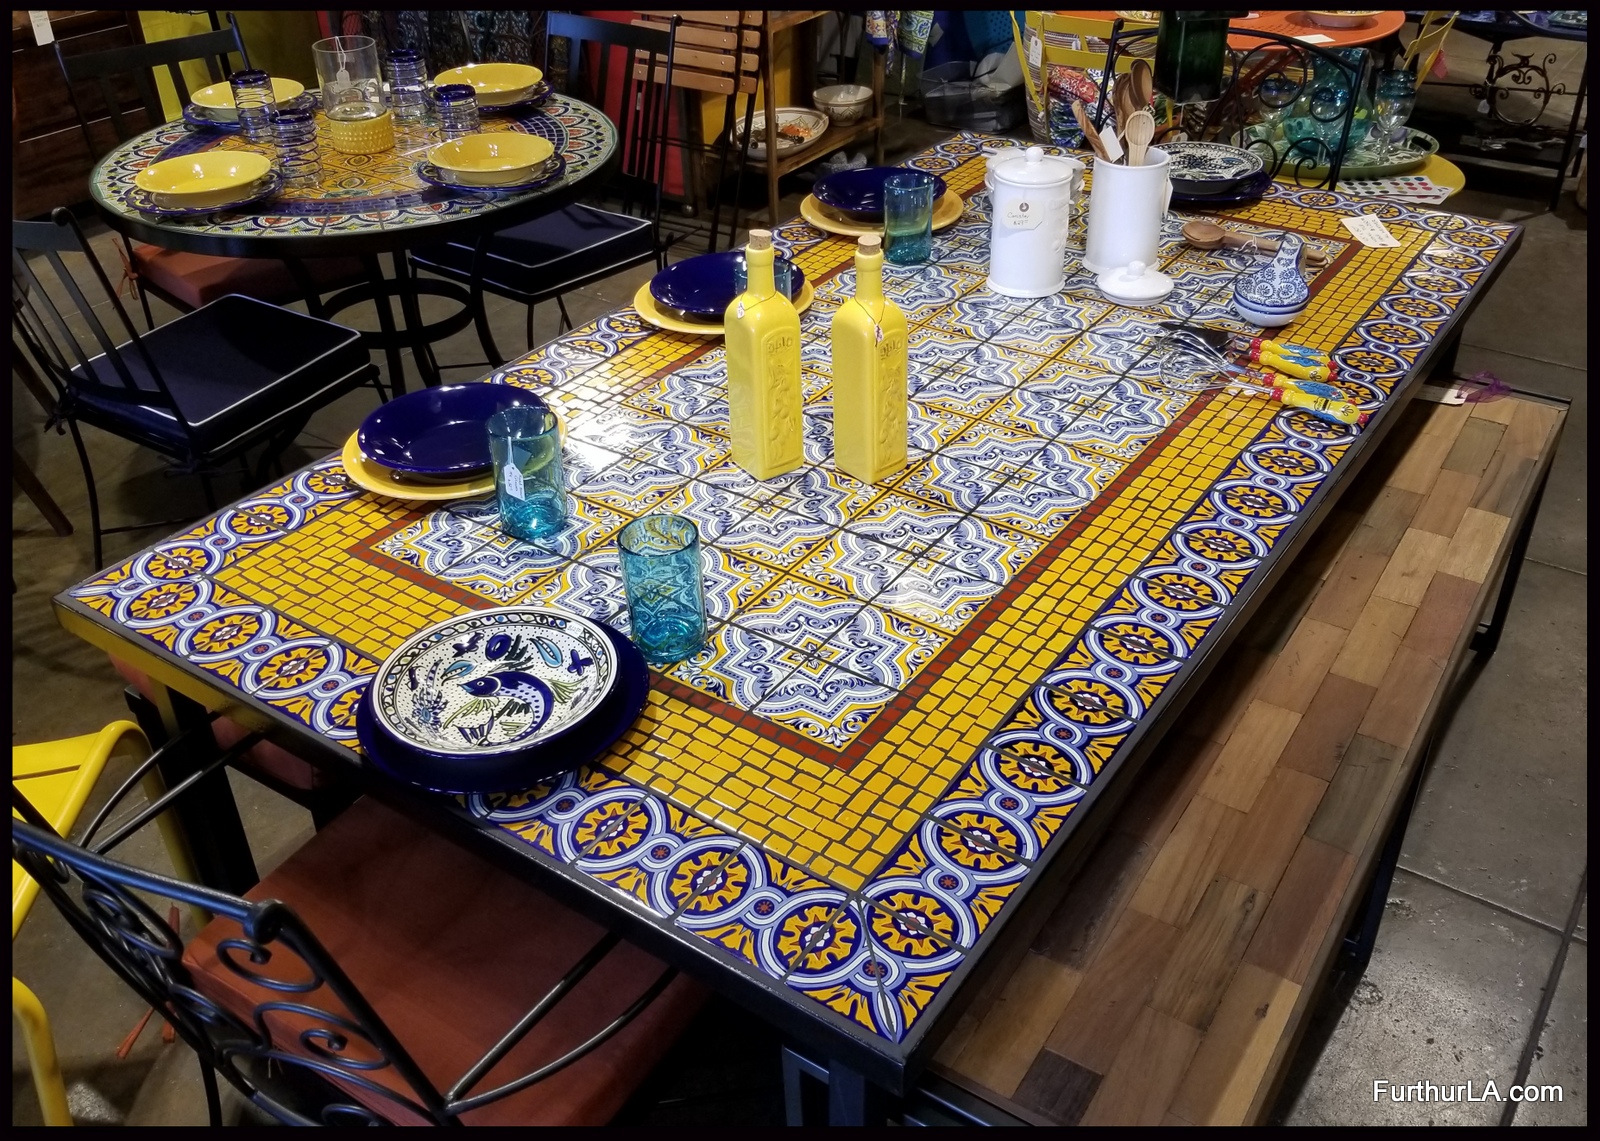 Furthur Whole Mosaic Dining Tables, Tile Kitchen Table And Chairs